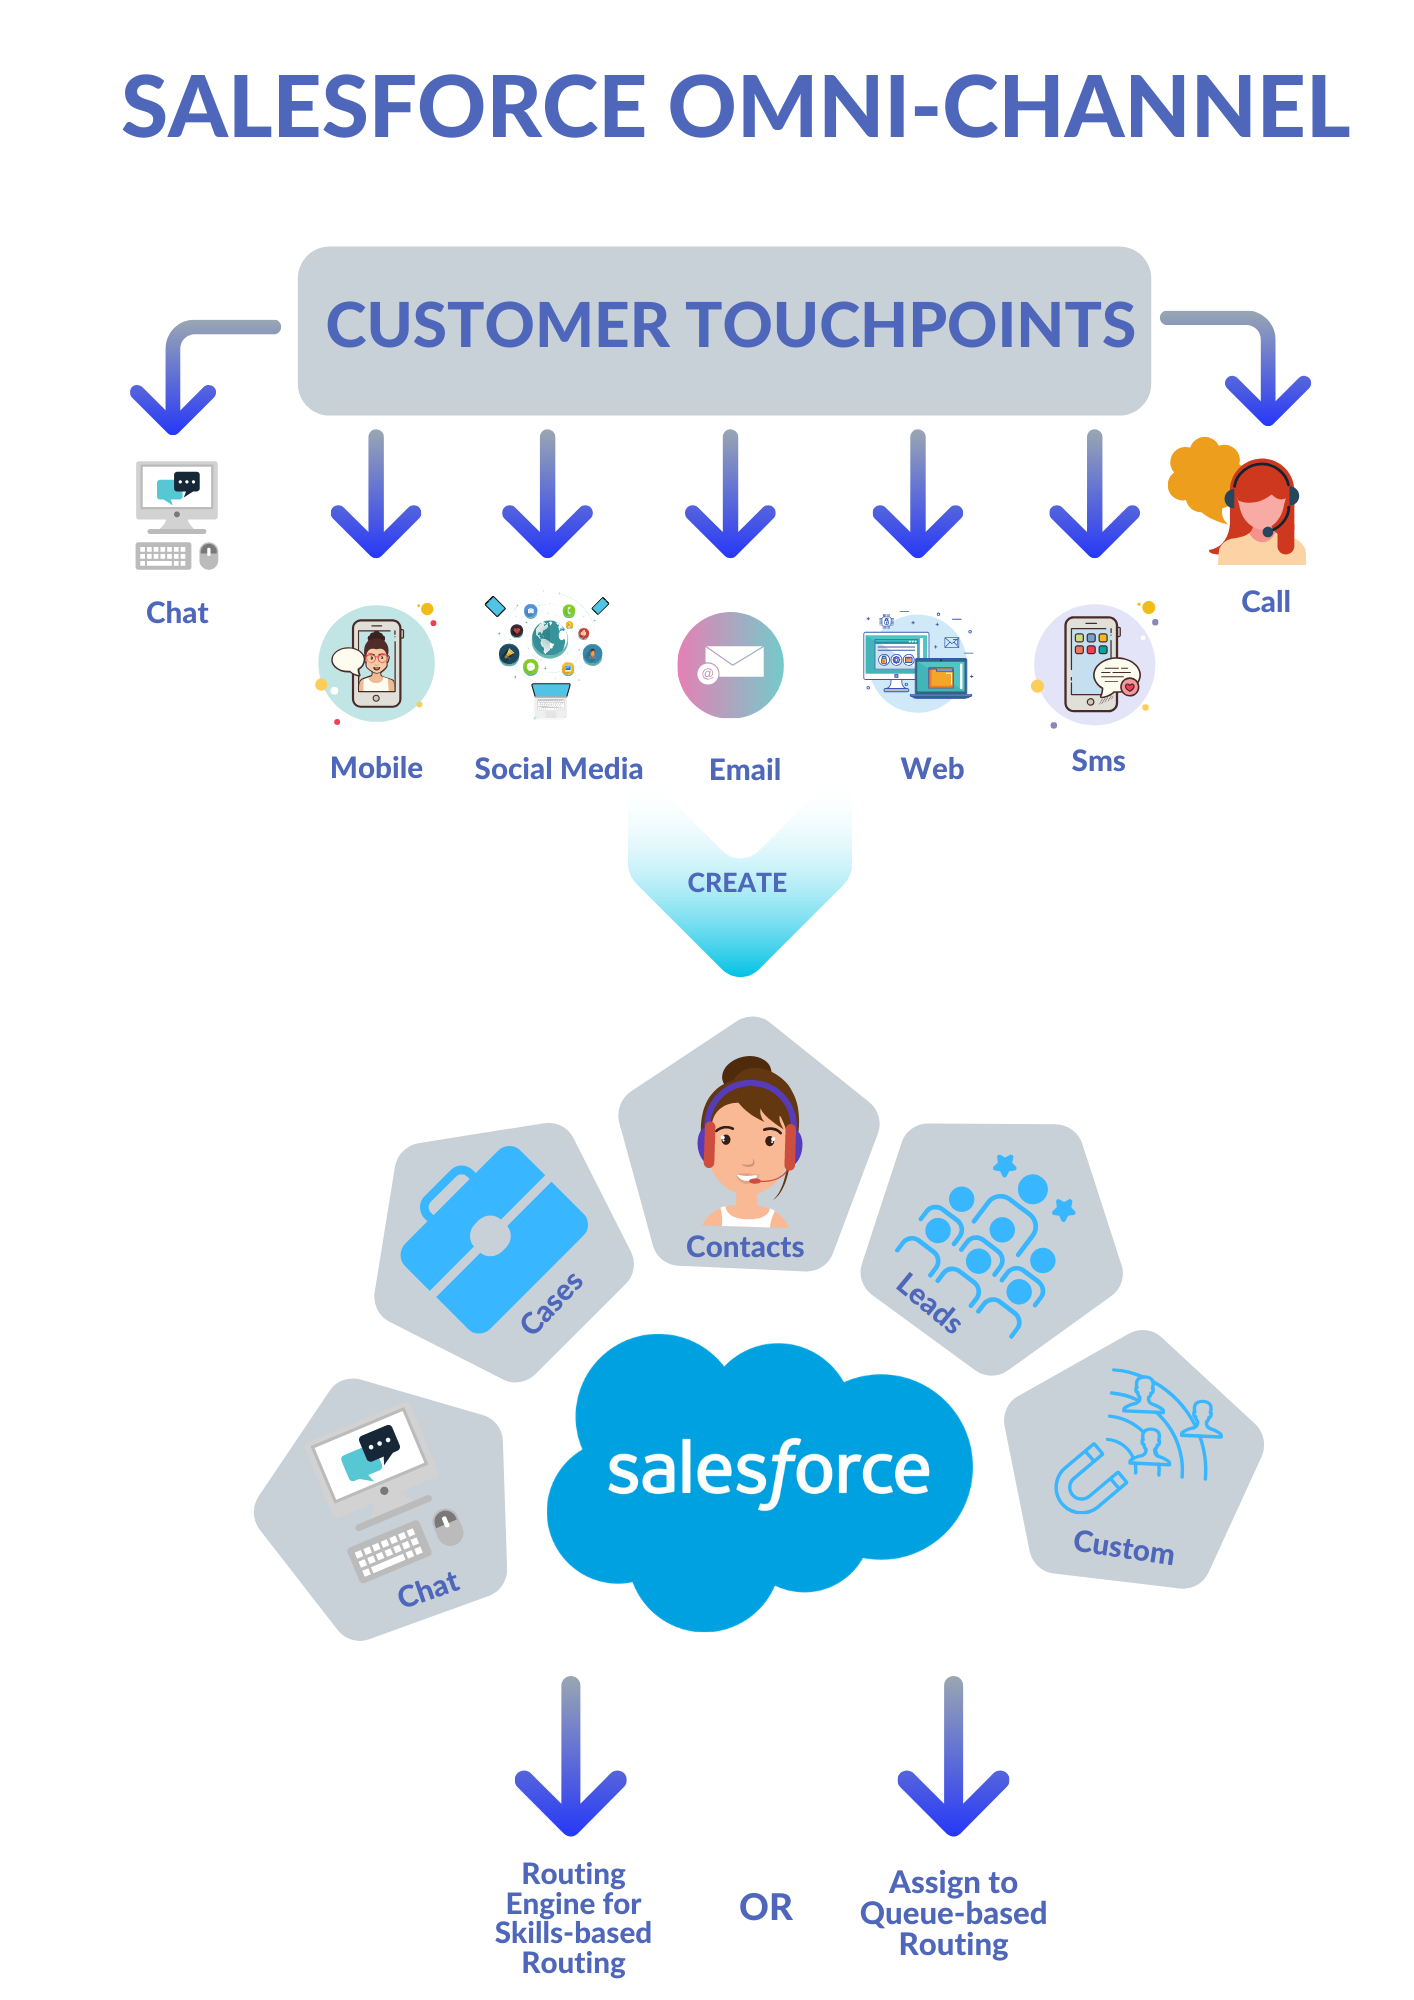 What is Omni-Channel Salesforce?